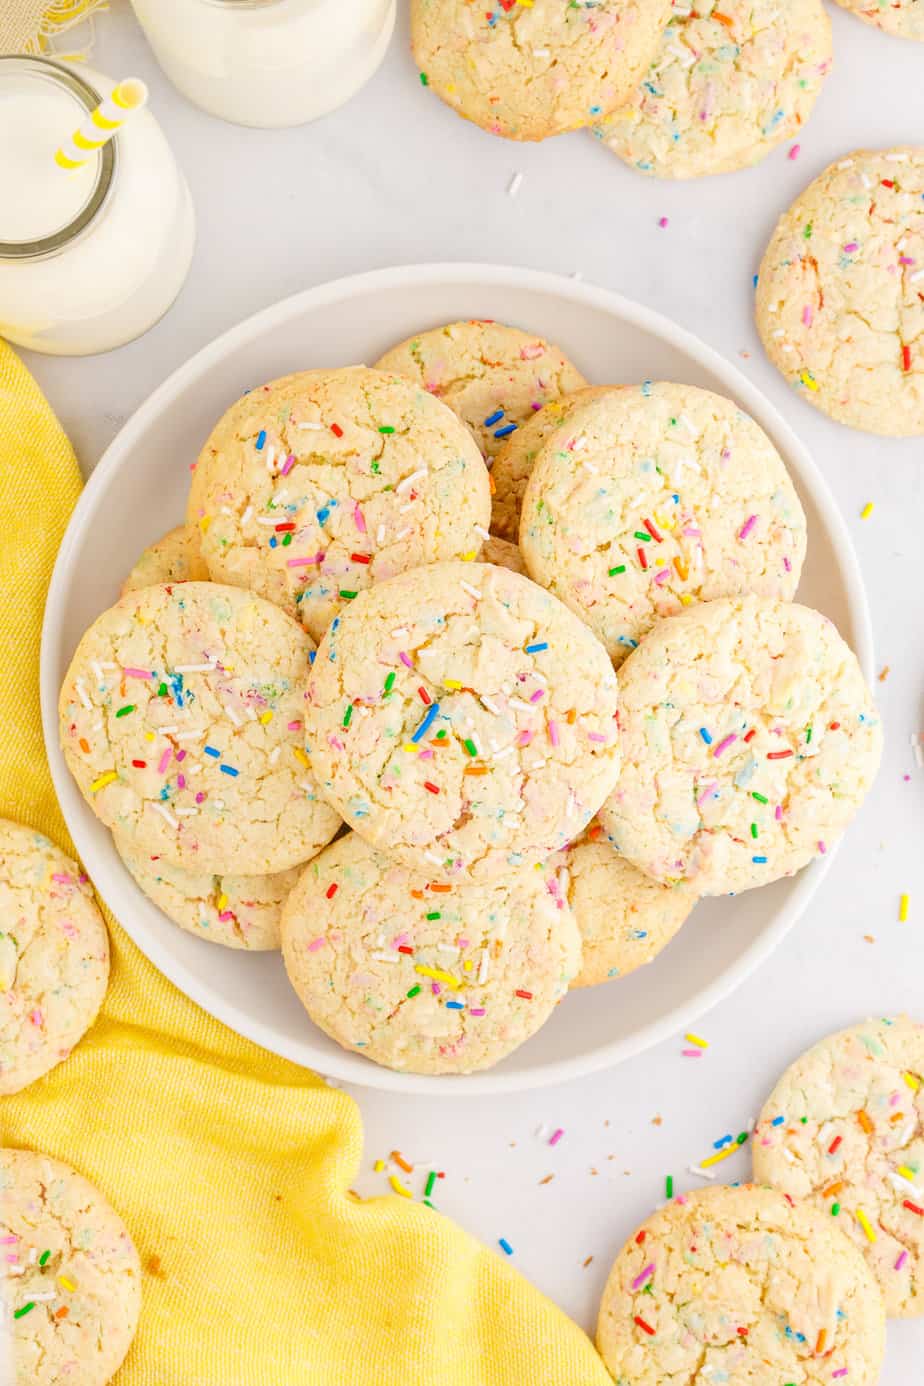 A plate of funfetti cookies with extra sprinkles on top from overhead on a table with milk and more cookies near the plate.